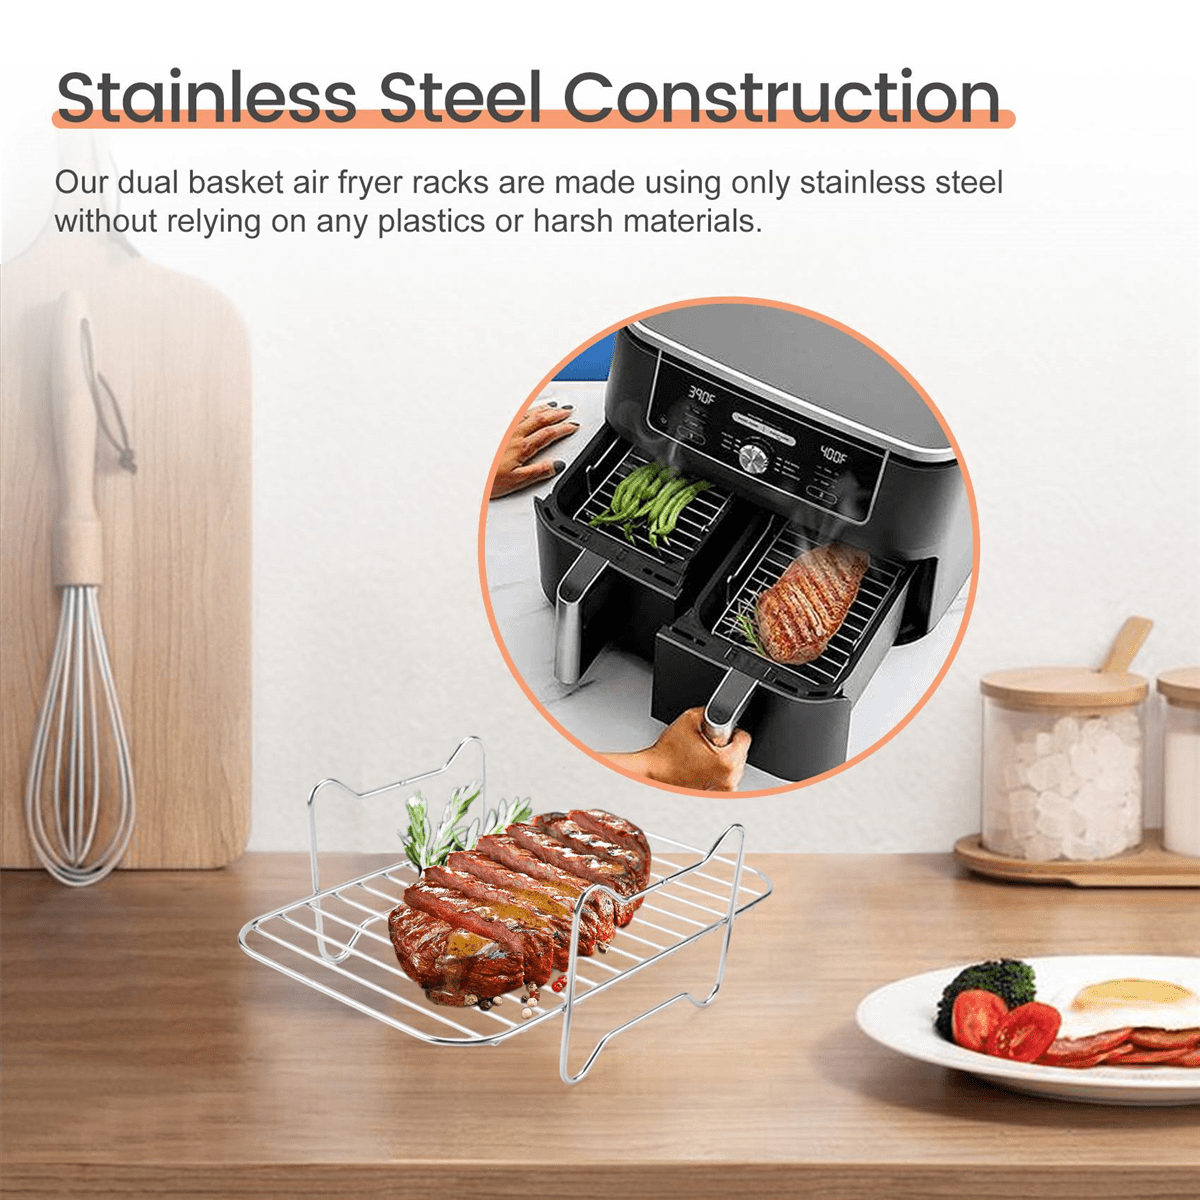  Dual Basket Air Fryer Accessories, 15pcs Set for Ninja DZ401  DZ201 Foodi Dualzone Air Fryers with 100pcs Air Fryer Liners, 2 Non-Stick  Pans, Bread,Toasting,Skewer Racks, 6 Cake Cups, 2 Mitts, Recipes